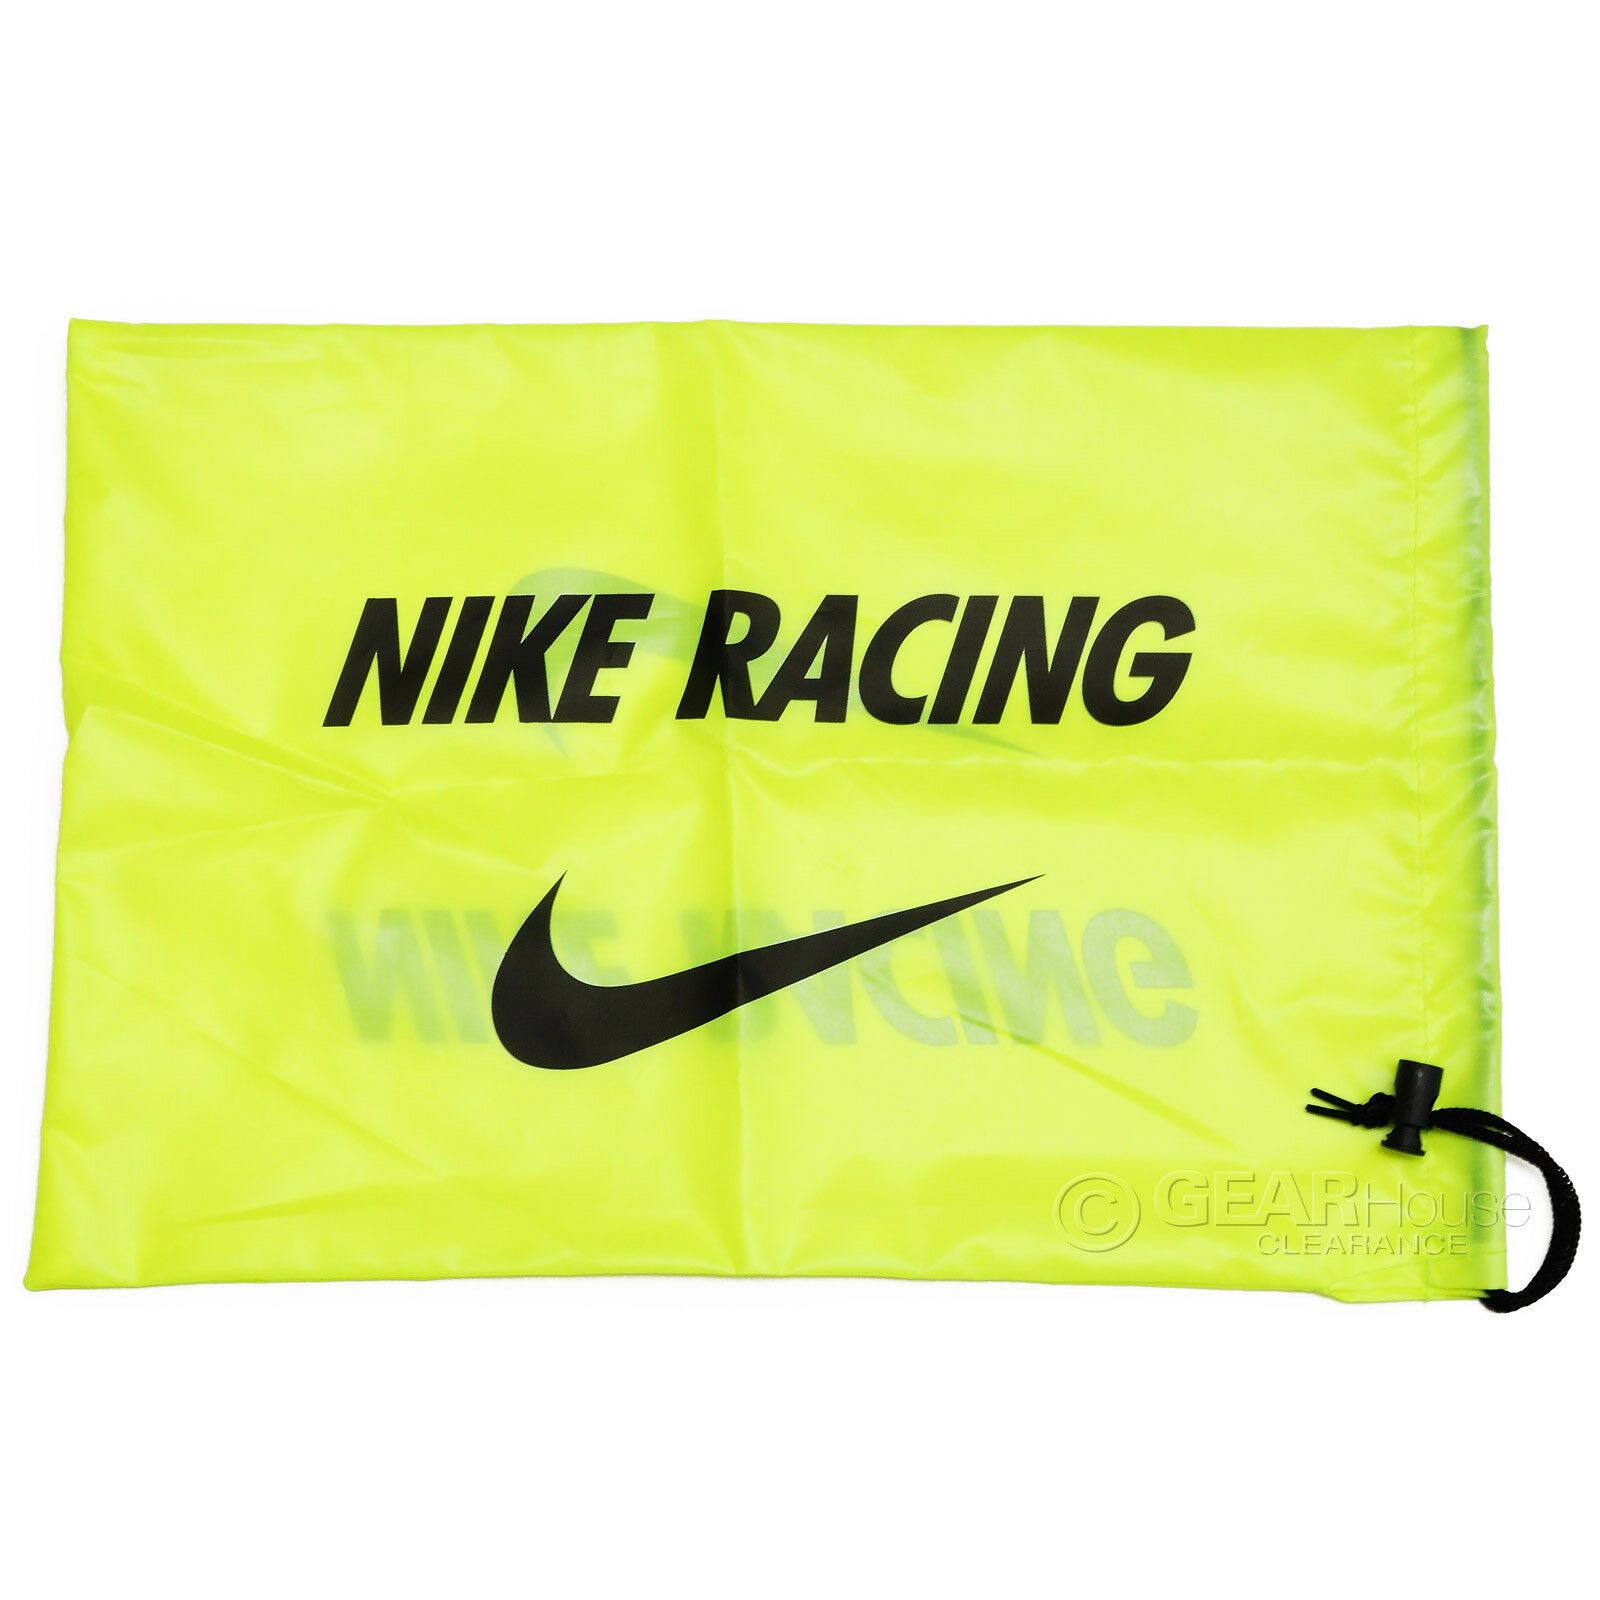 Nike Track & Field Spikes Shoe String Bag Carry Tote Drawstring Volt Yellow